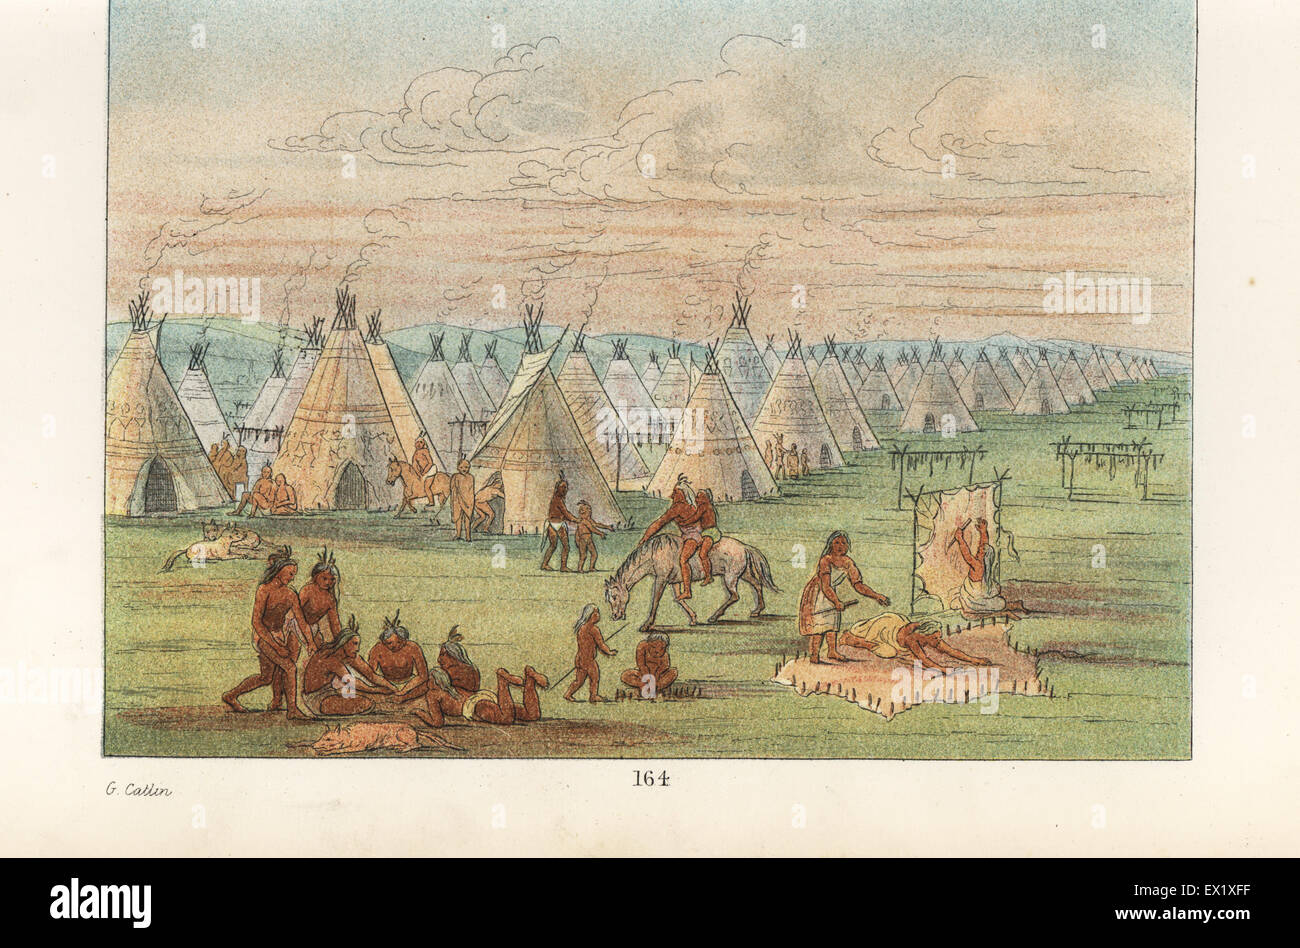 Comanche village of 600 wigwams with chief's teepee in foreground, women drying meat and graining bison skins. Handcoloured lithograph from George Catlin's Manners, Customs and Condition of the North American Indians, London, 1841. Stock Photo